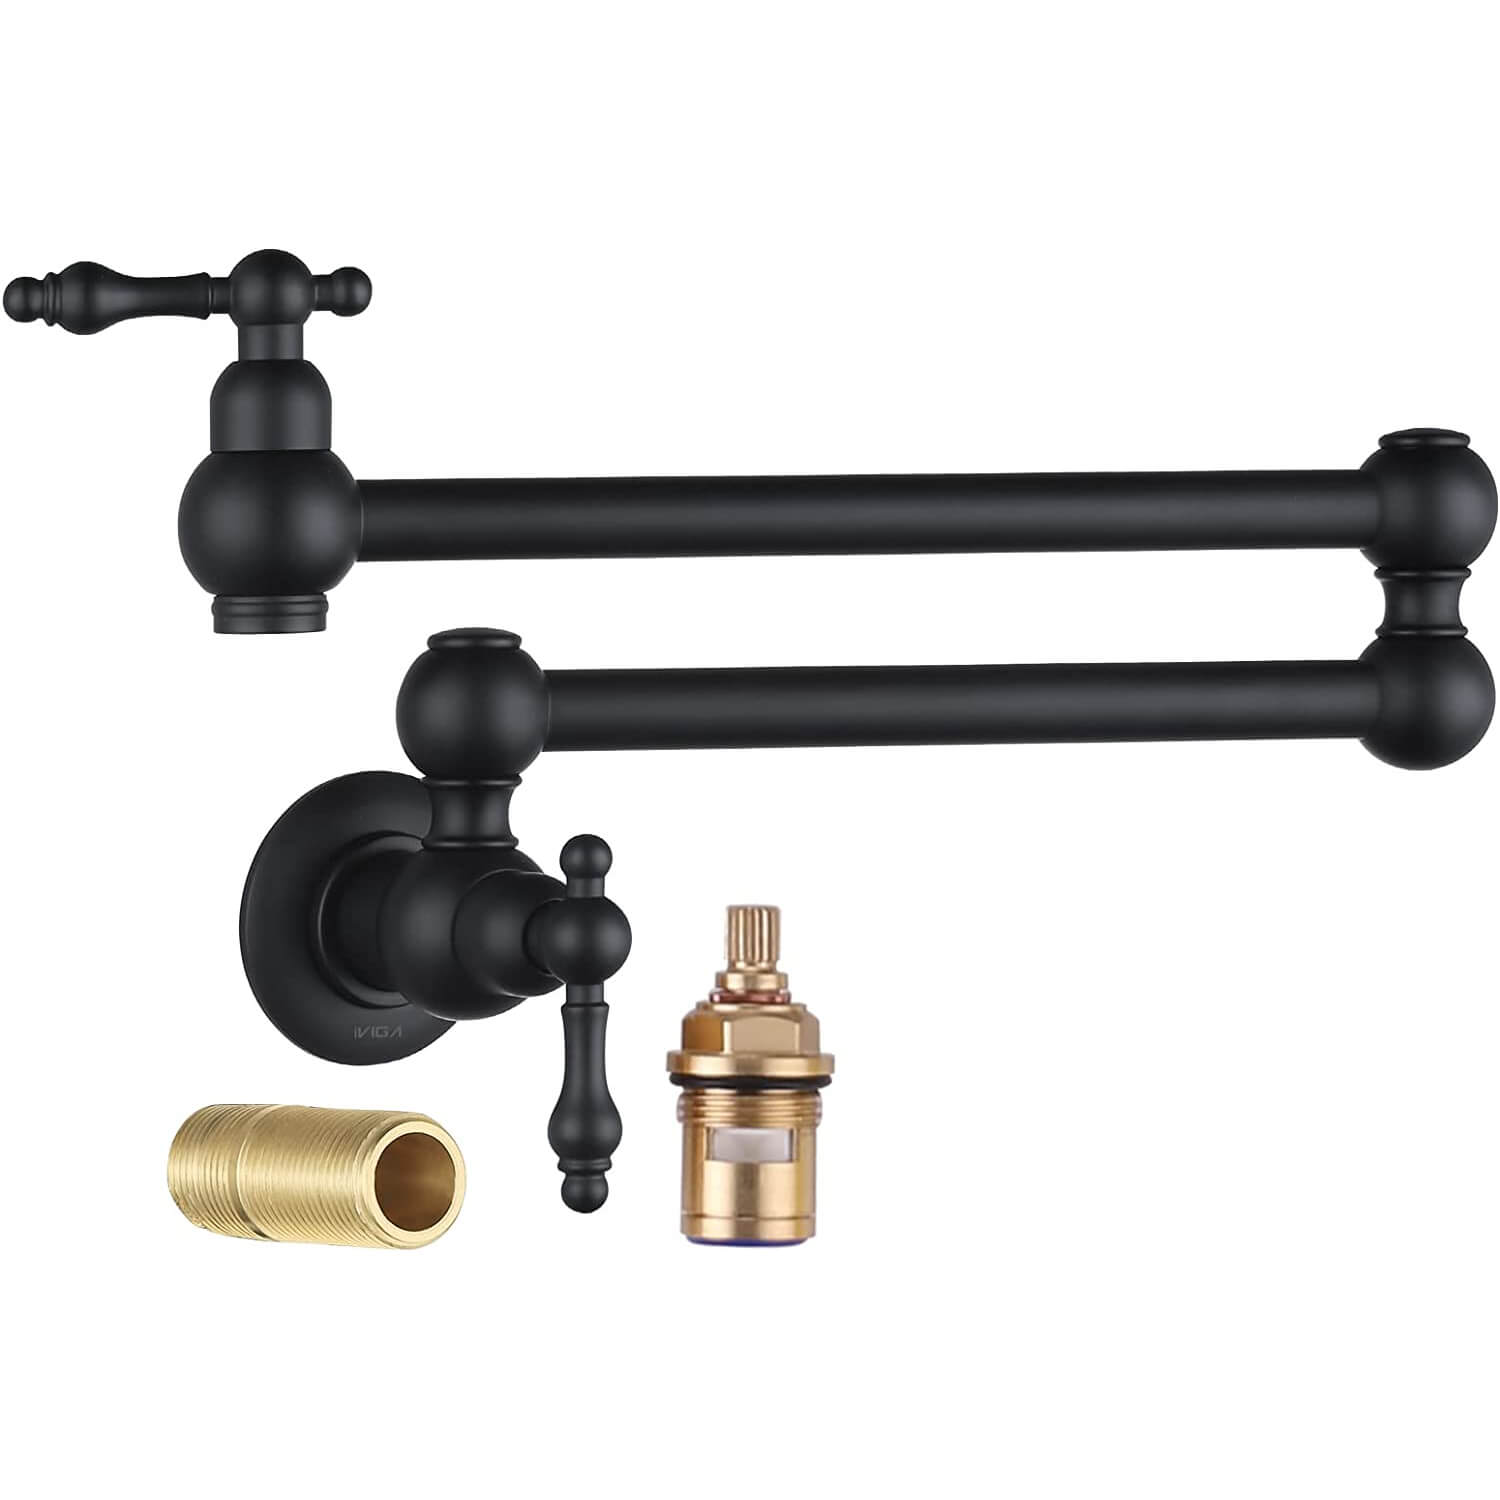 iVIGA Oil Rubbed Bronze Pot Filler Kitchen Folding Faucet with Double Joint Swing Arm